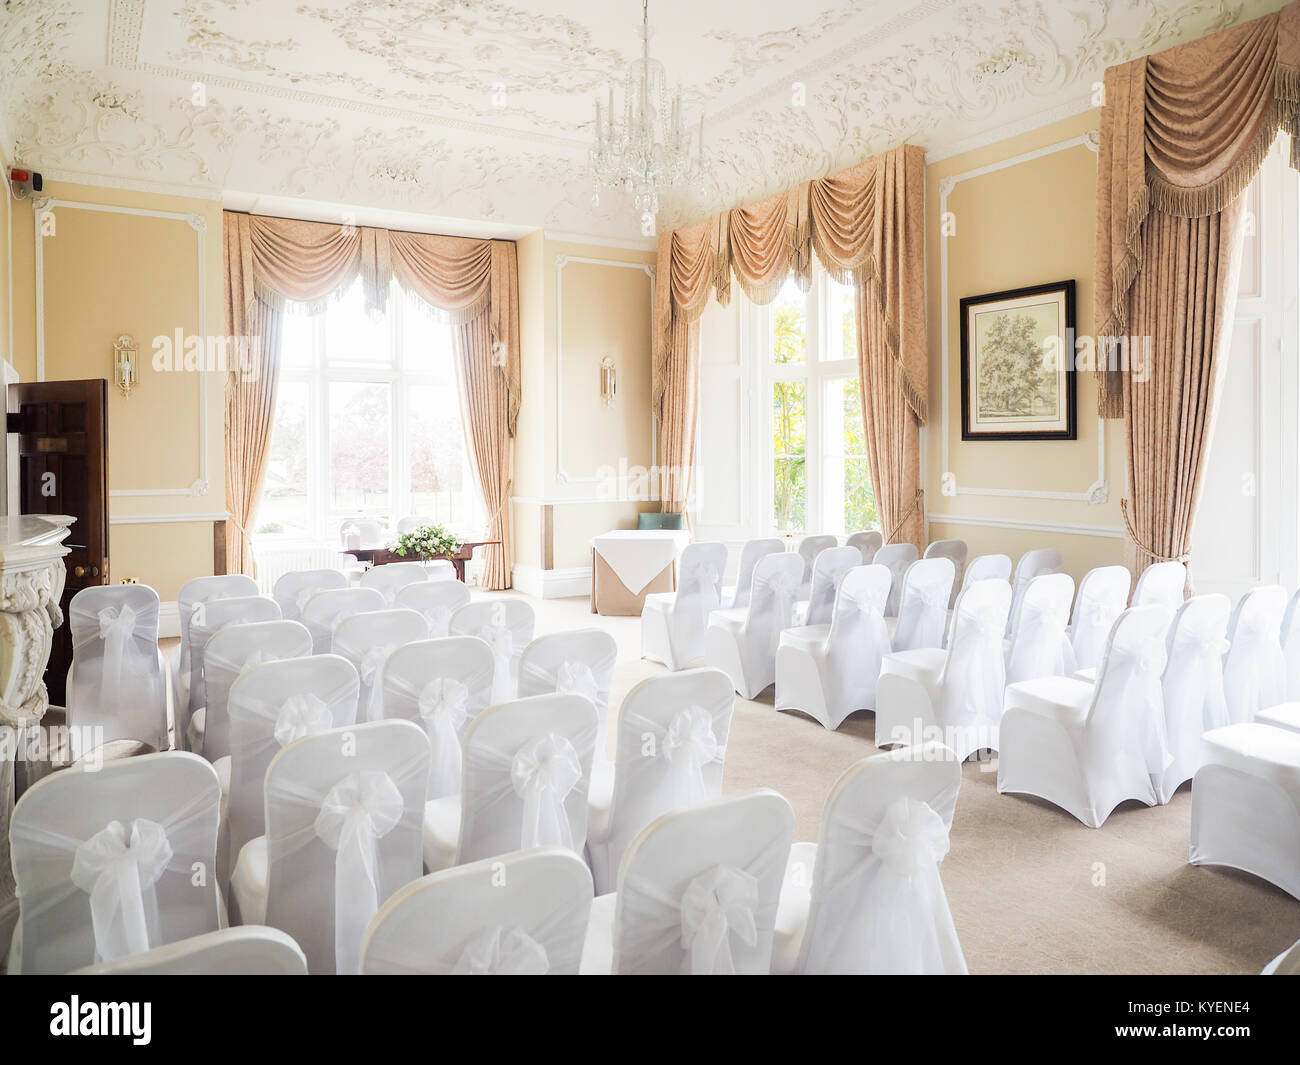 Chair Covers Stock Photos Chair Covers Stock Images Alamy